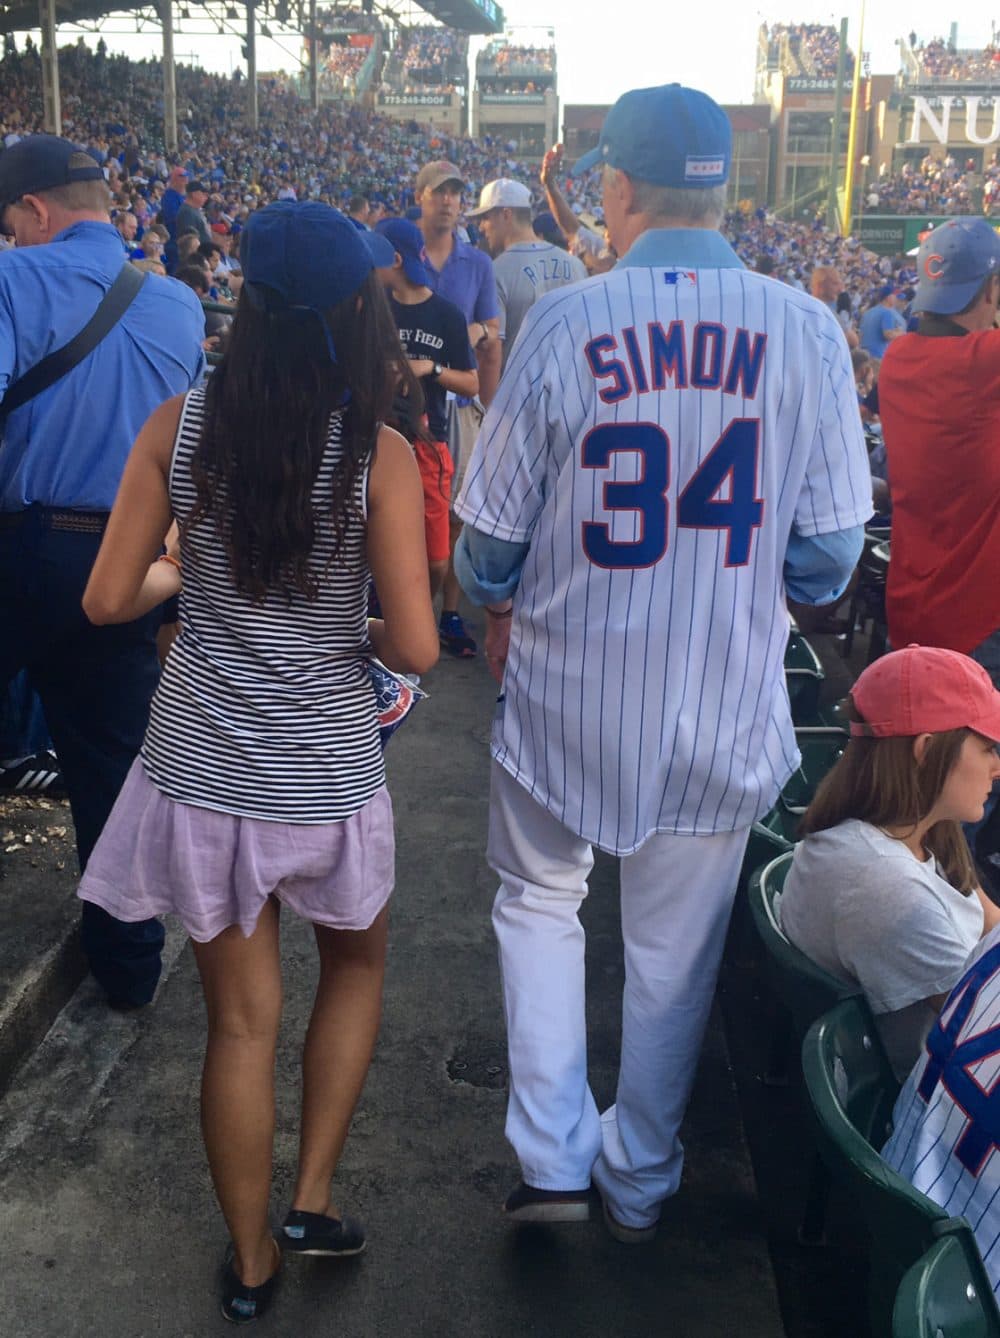 Simon with his daughter after throwing out the first pitch at Wrigley Field before a game in 2016. (Courtesy Scott Simon)